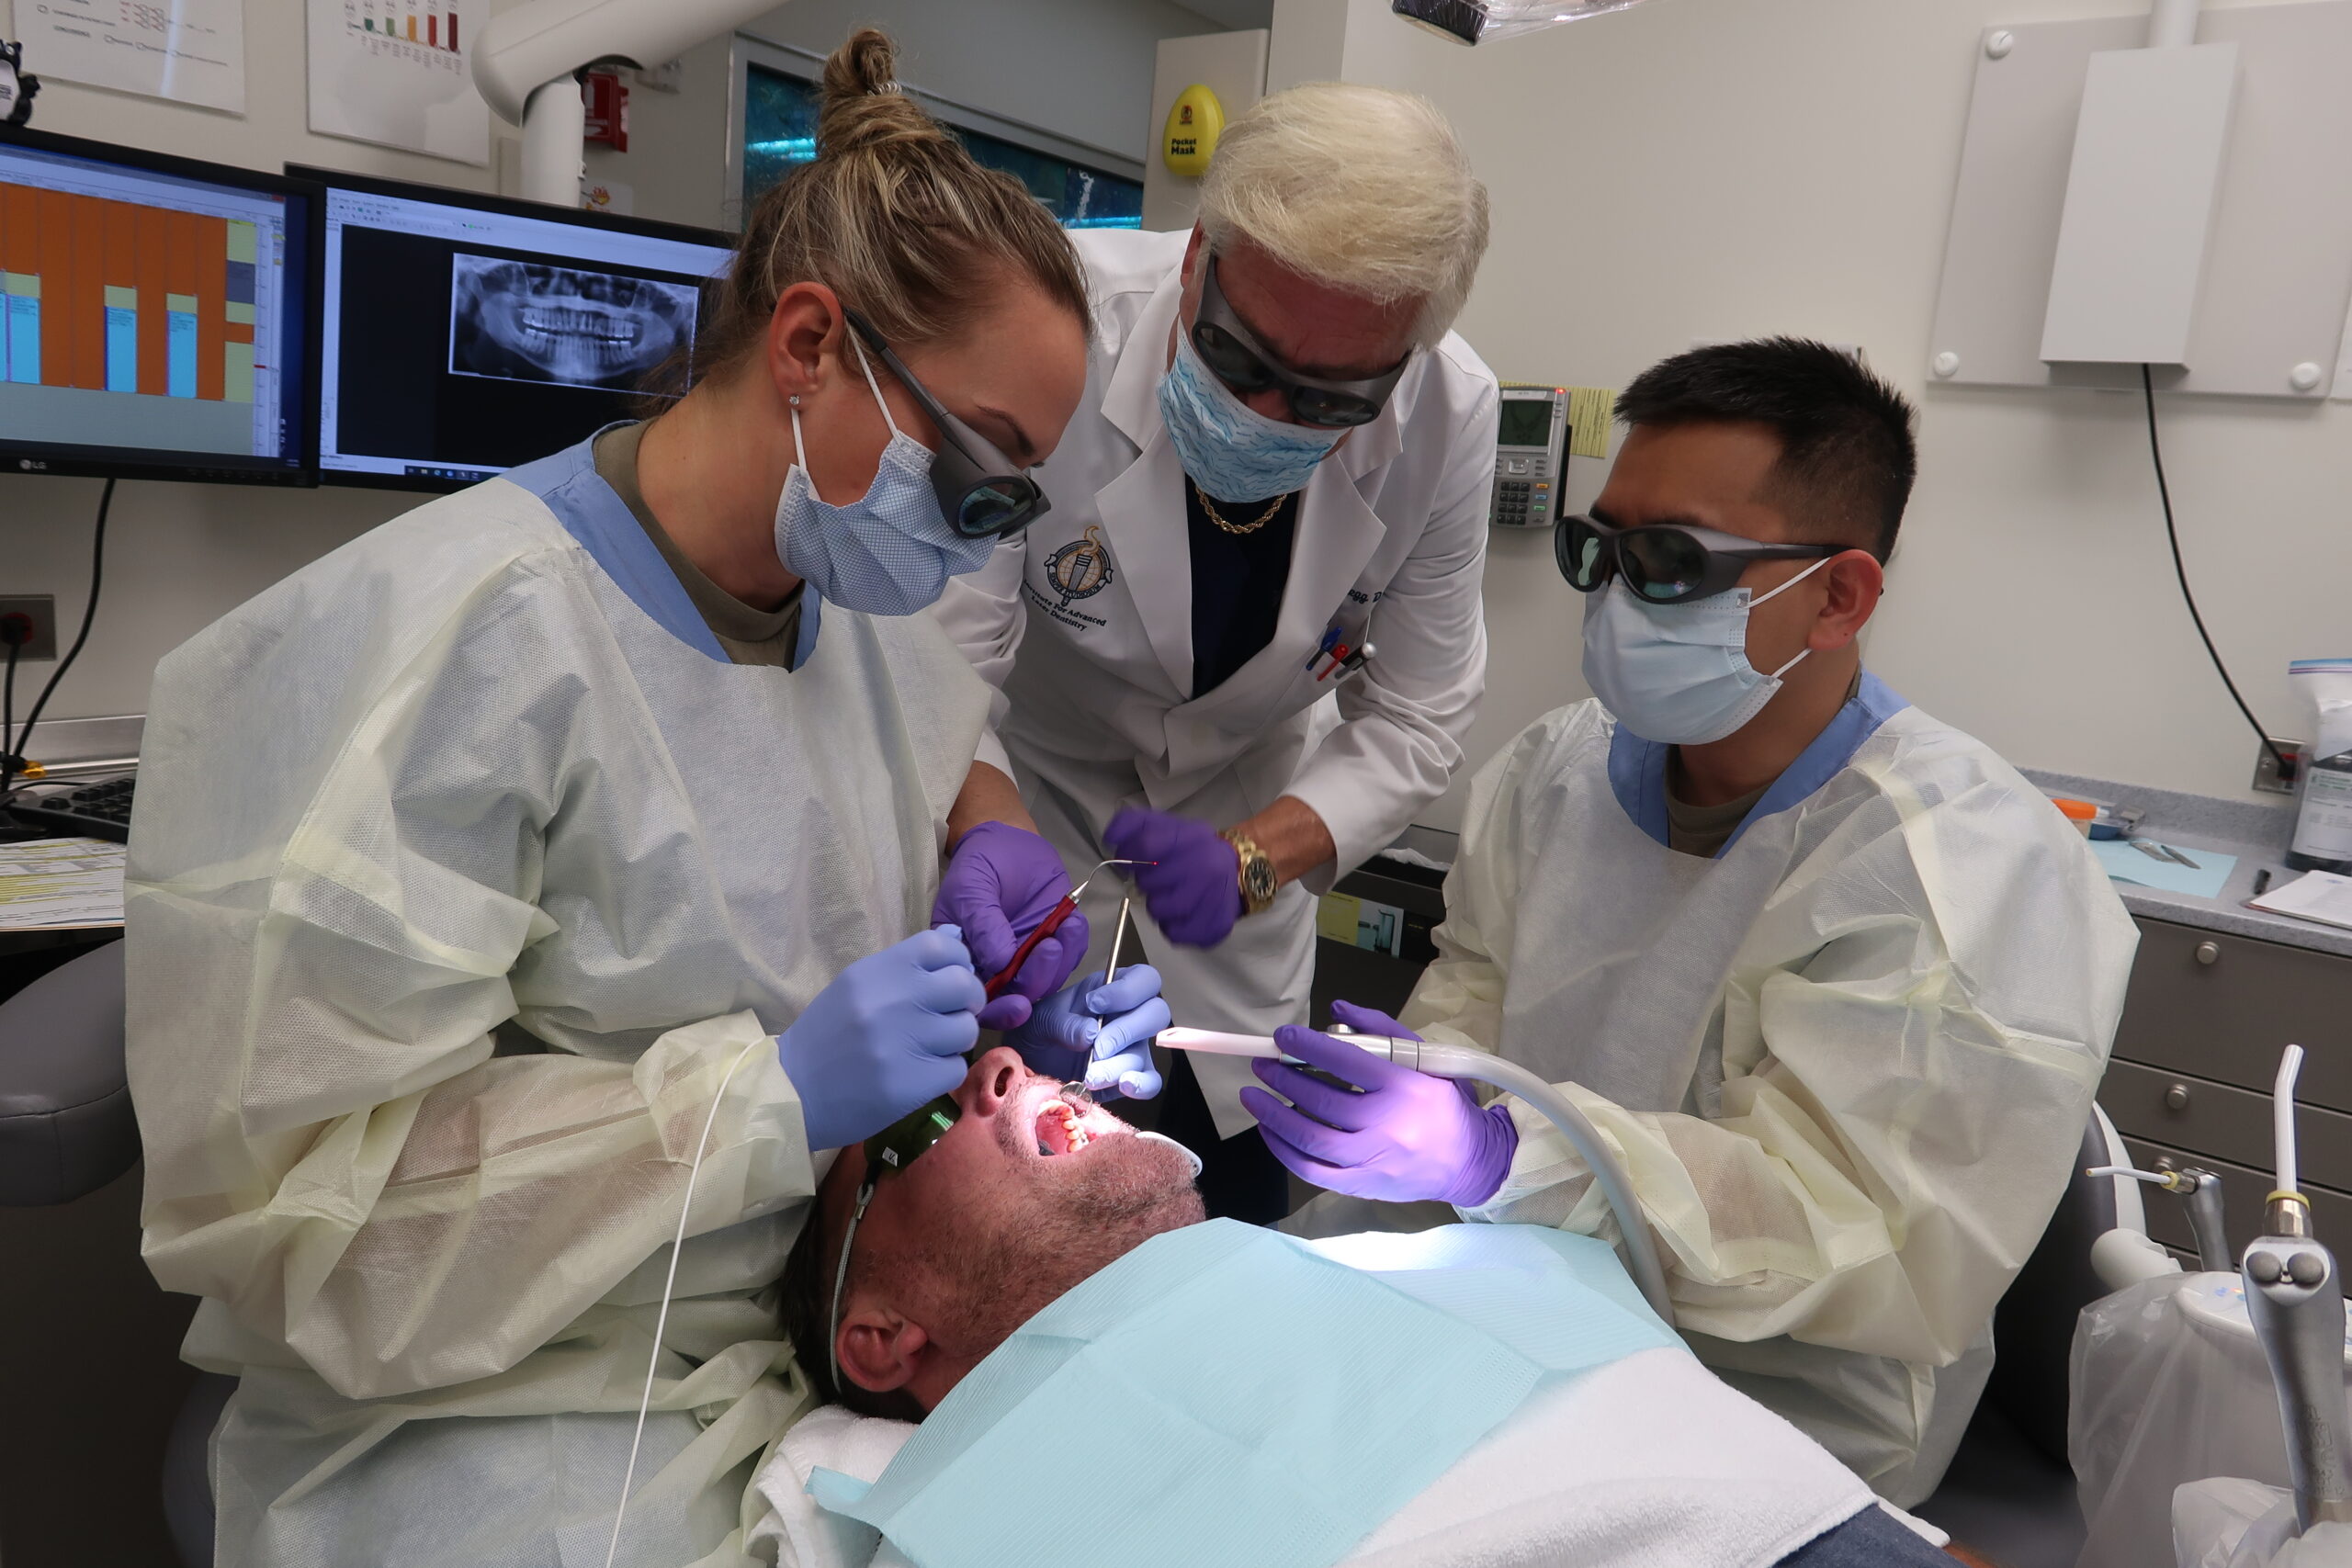 UNITED STATES AIR FORCE DEPLOYS LANAP® PROTOCOL AND  DENTAL LASER TECHNOLOGY TO TREAT PERIODONTAL DISEASE